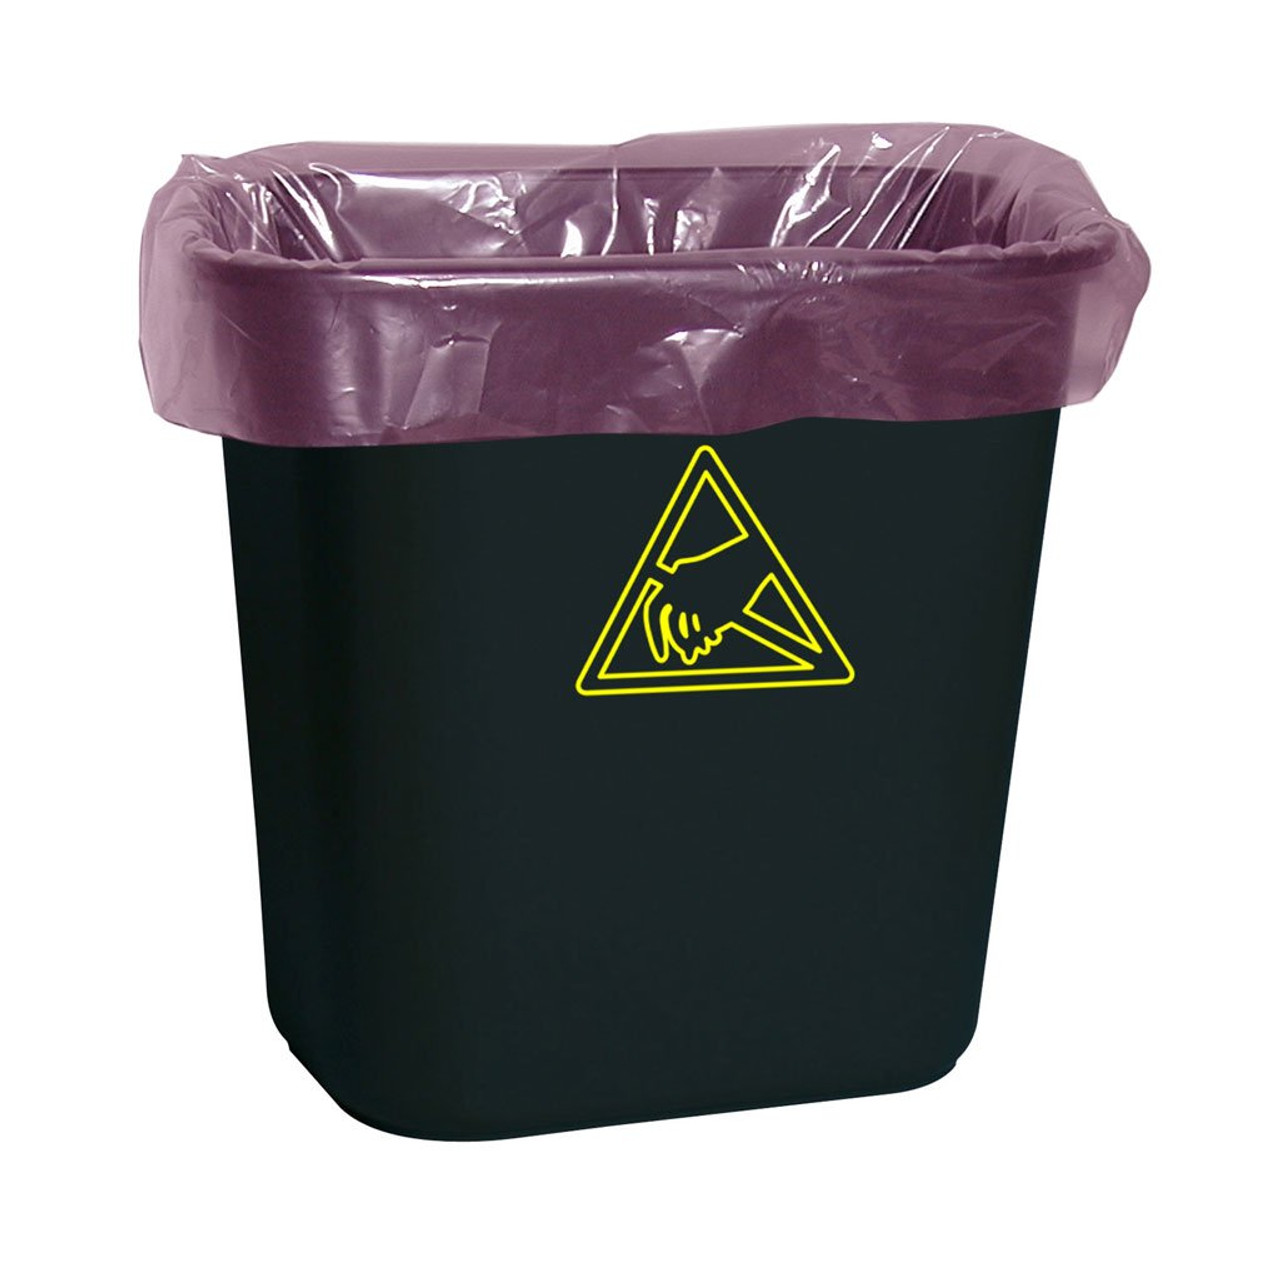 Protektive Pak - 37822 Trash Receptacle Liner, Small, Pink, 26 x 24 IN, 10  GAL